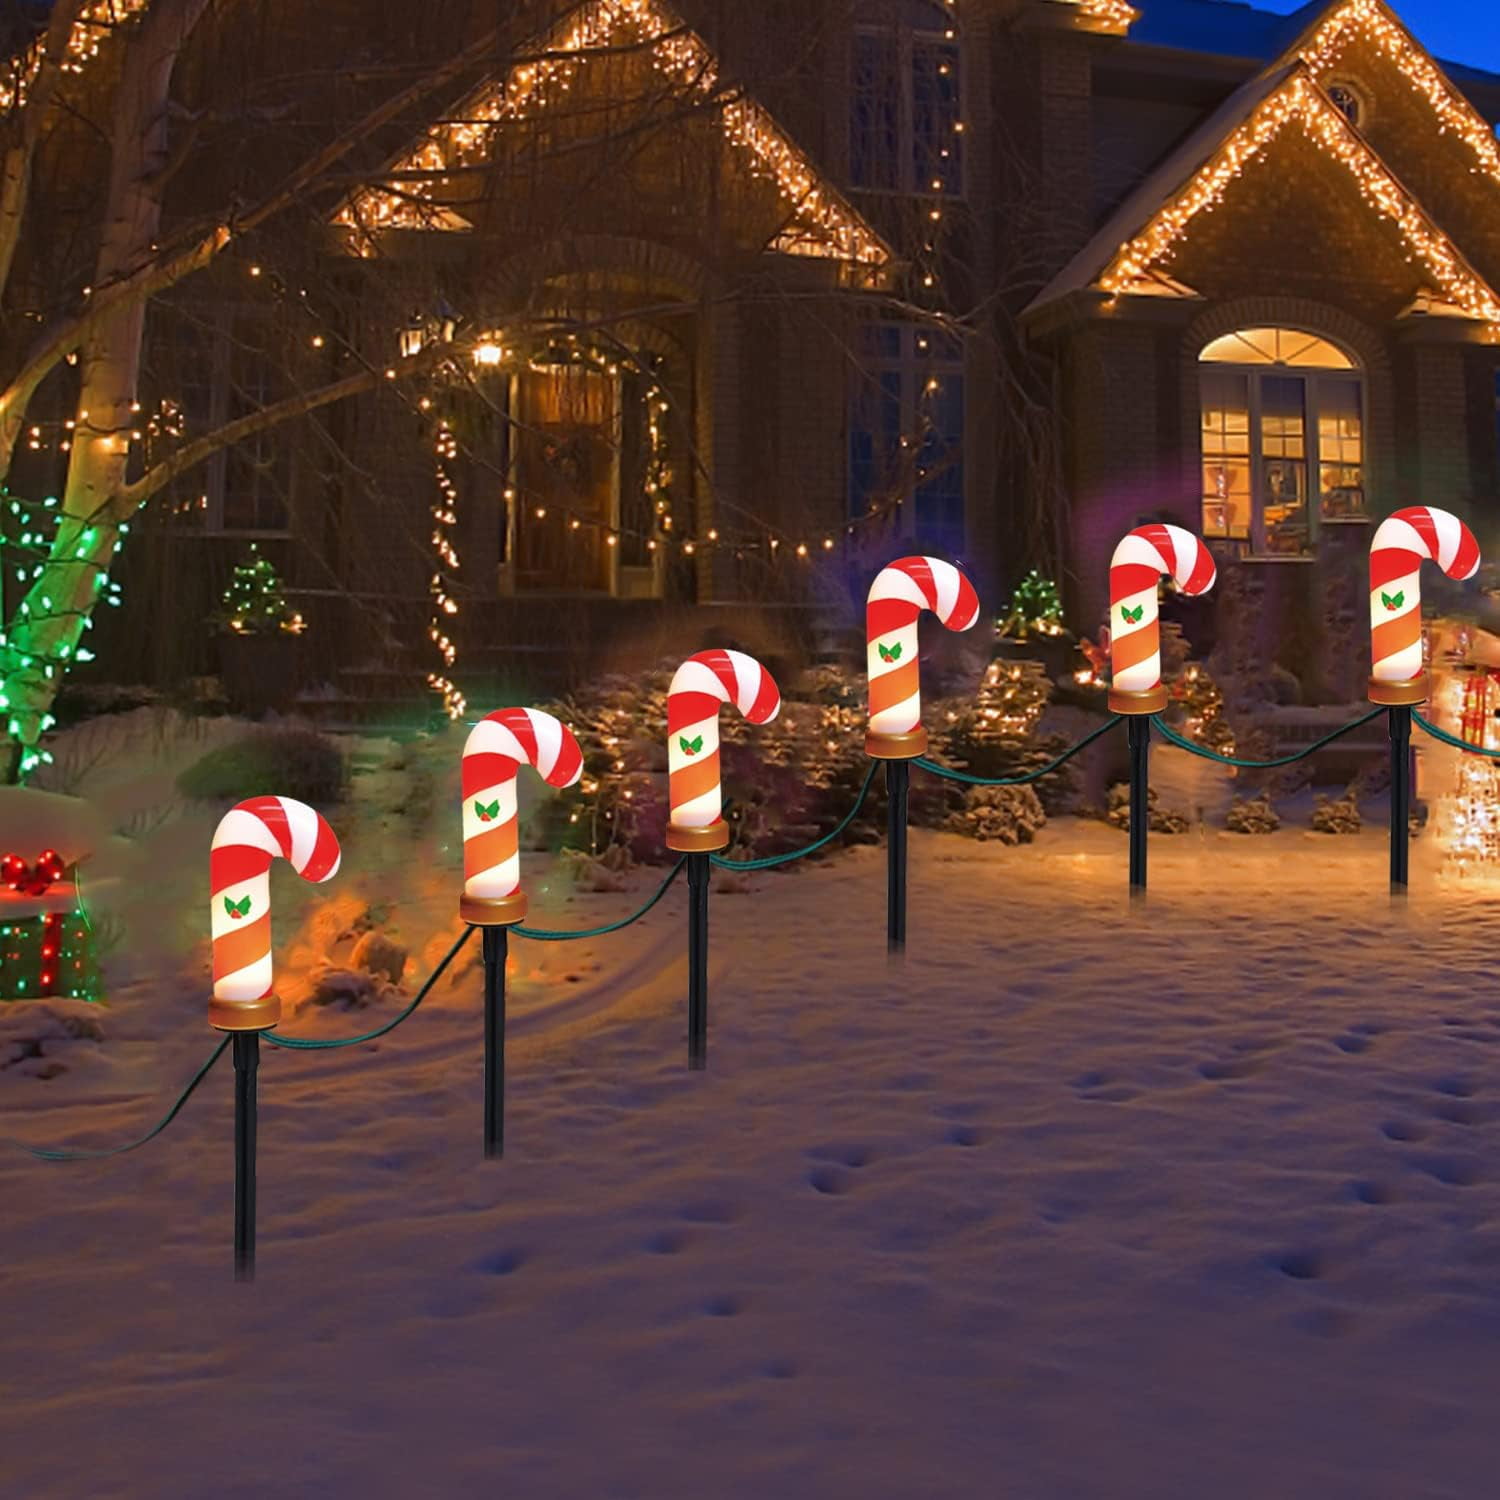 Outdoor Christmas Cane path Marker Light - 4 Christmas Cane Lights with ...